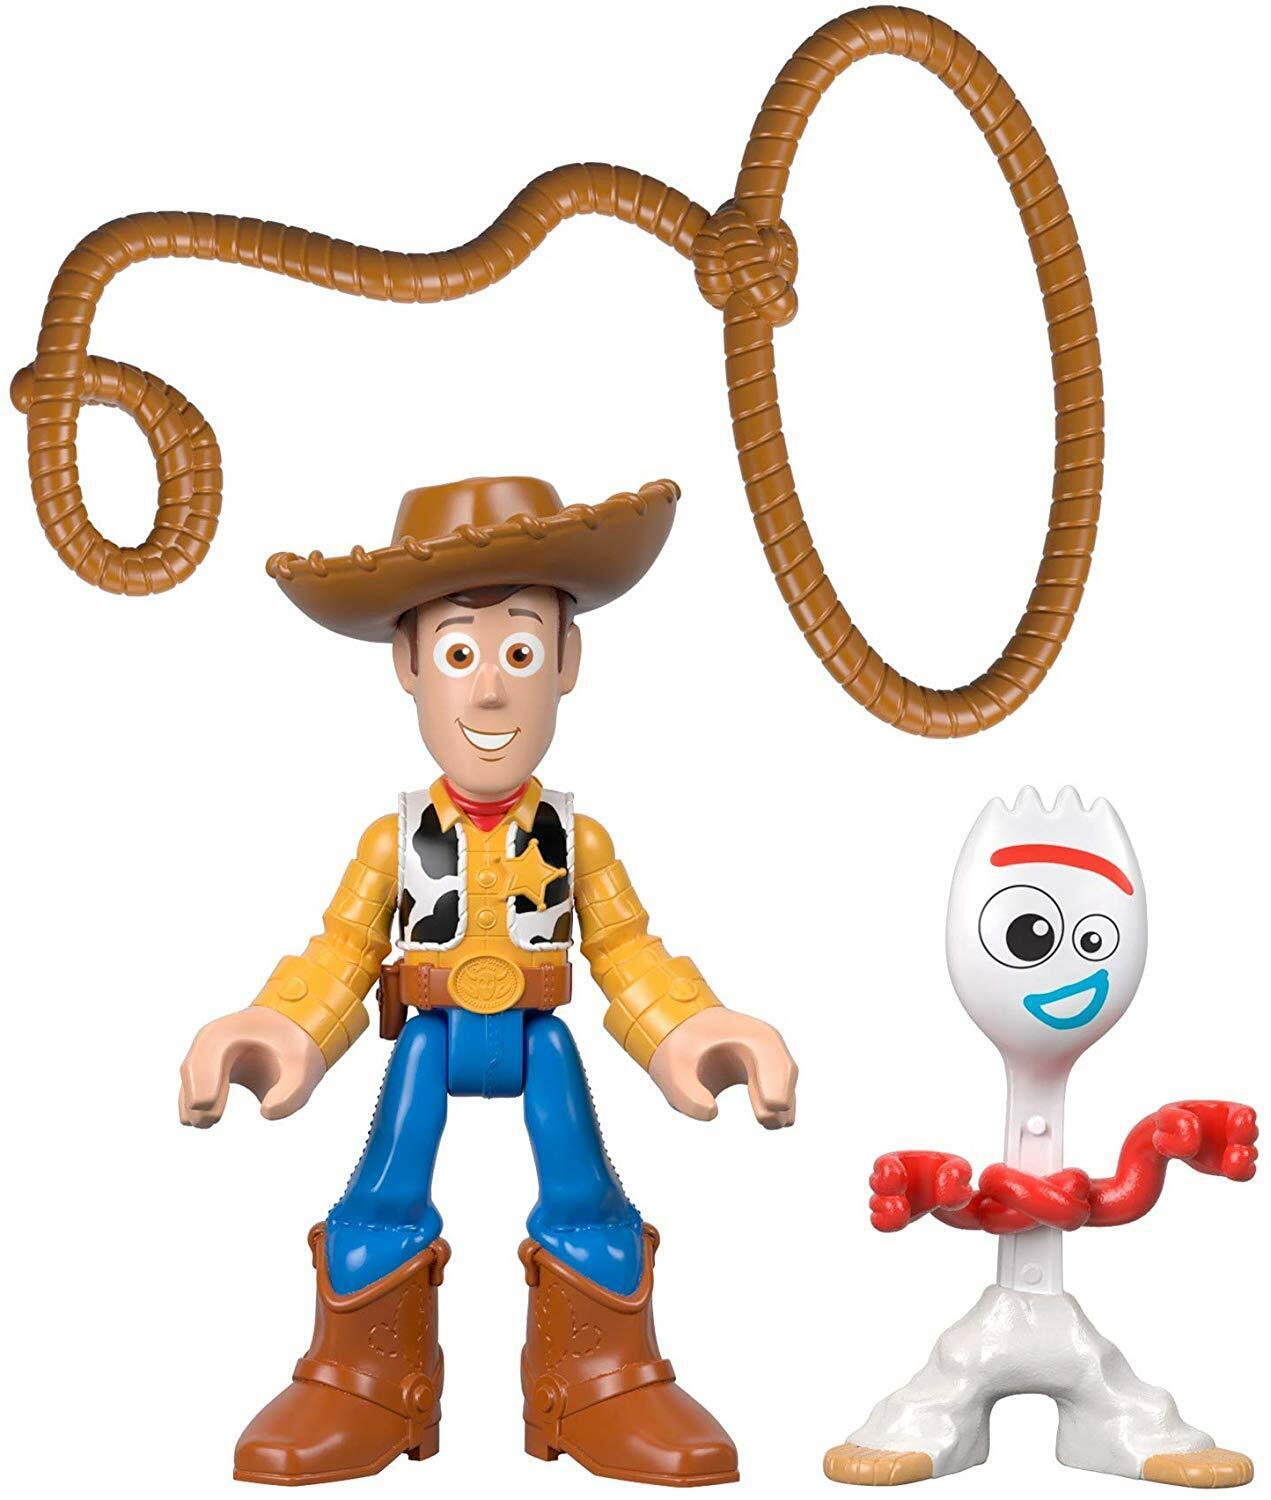 New Imaginext Toy Story 4 Forky & Woody Figures - Sealed Pack